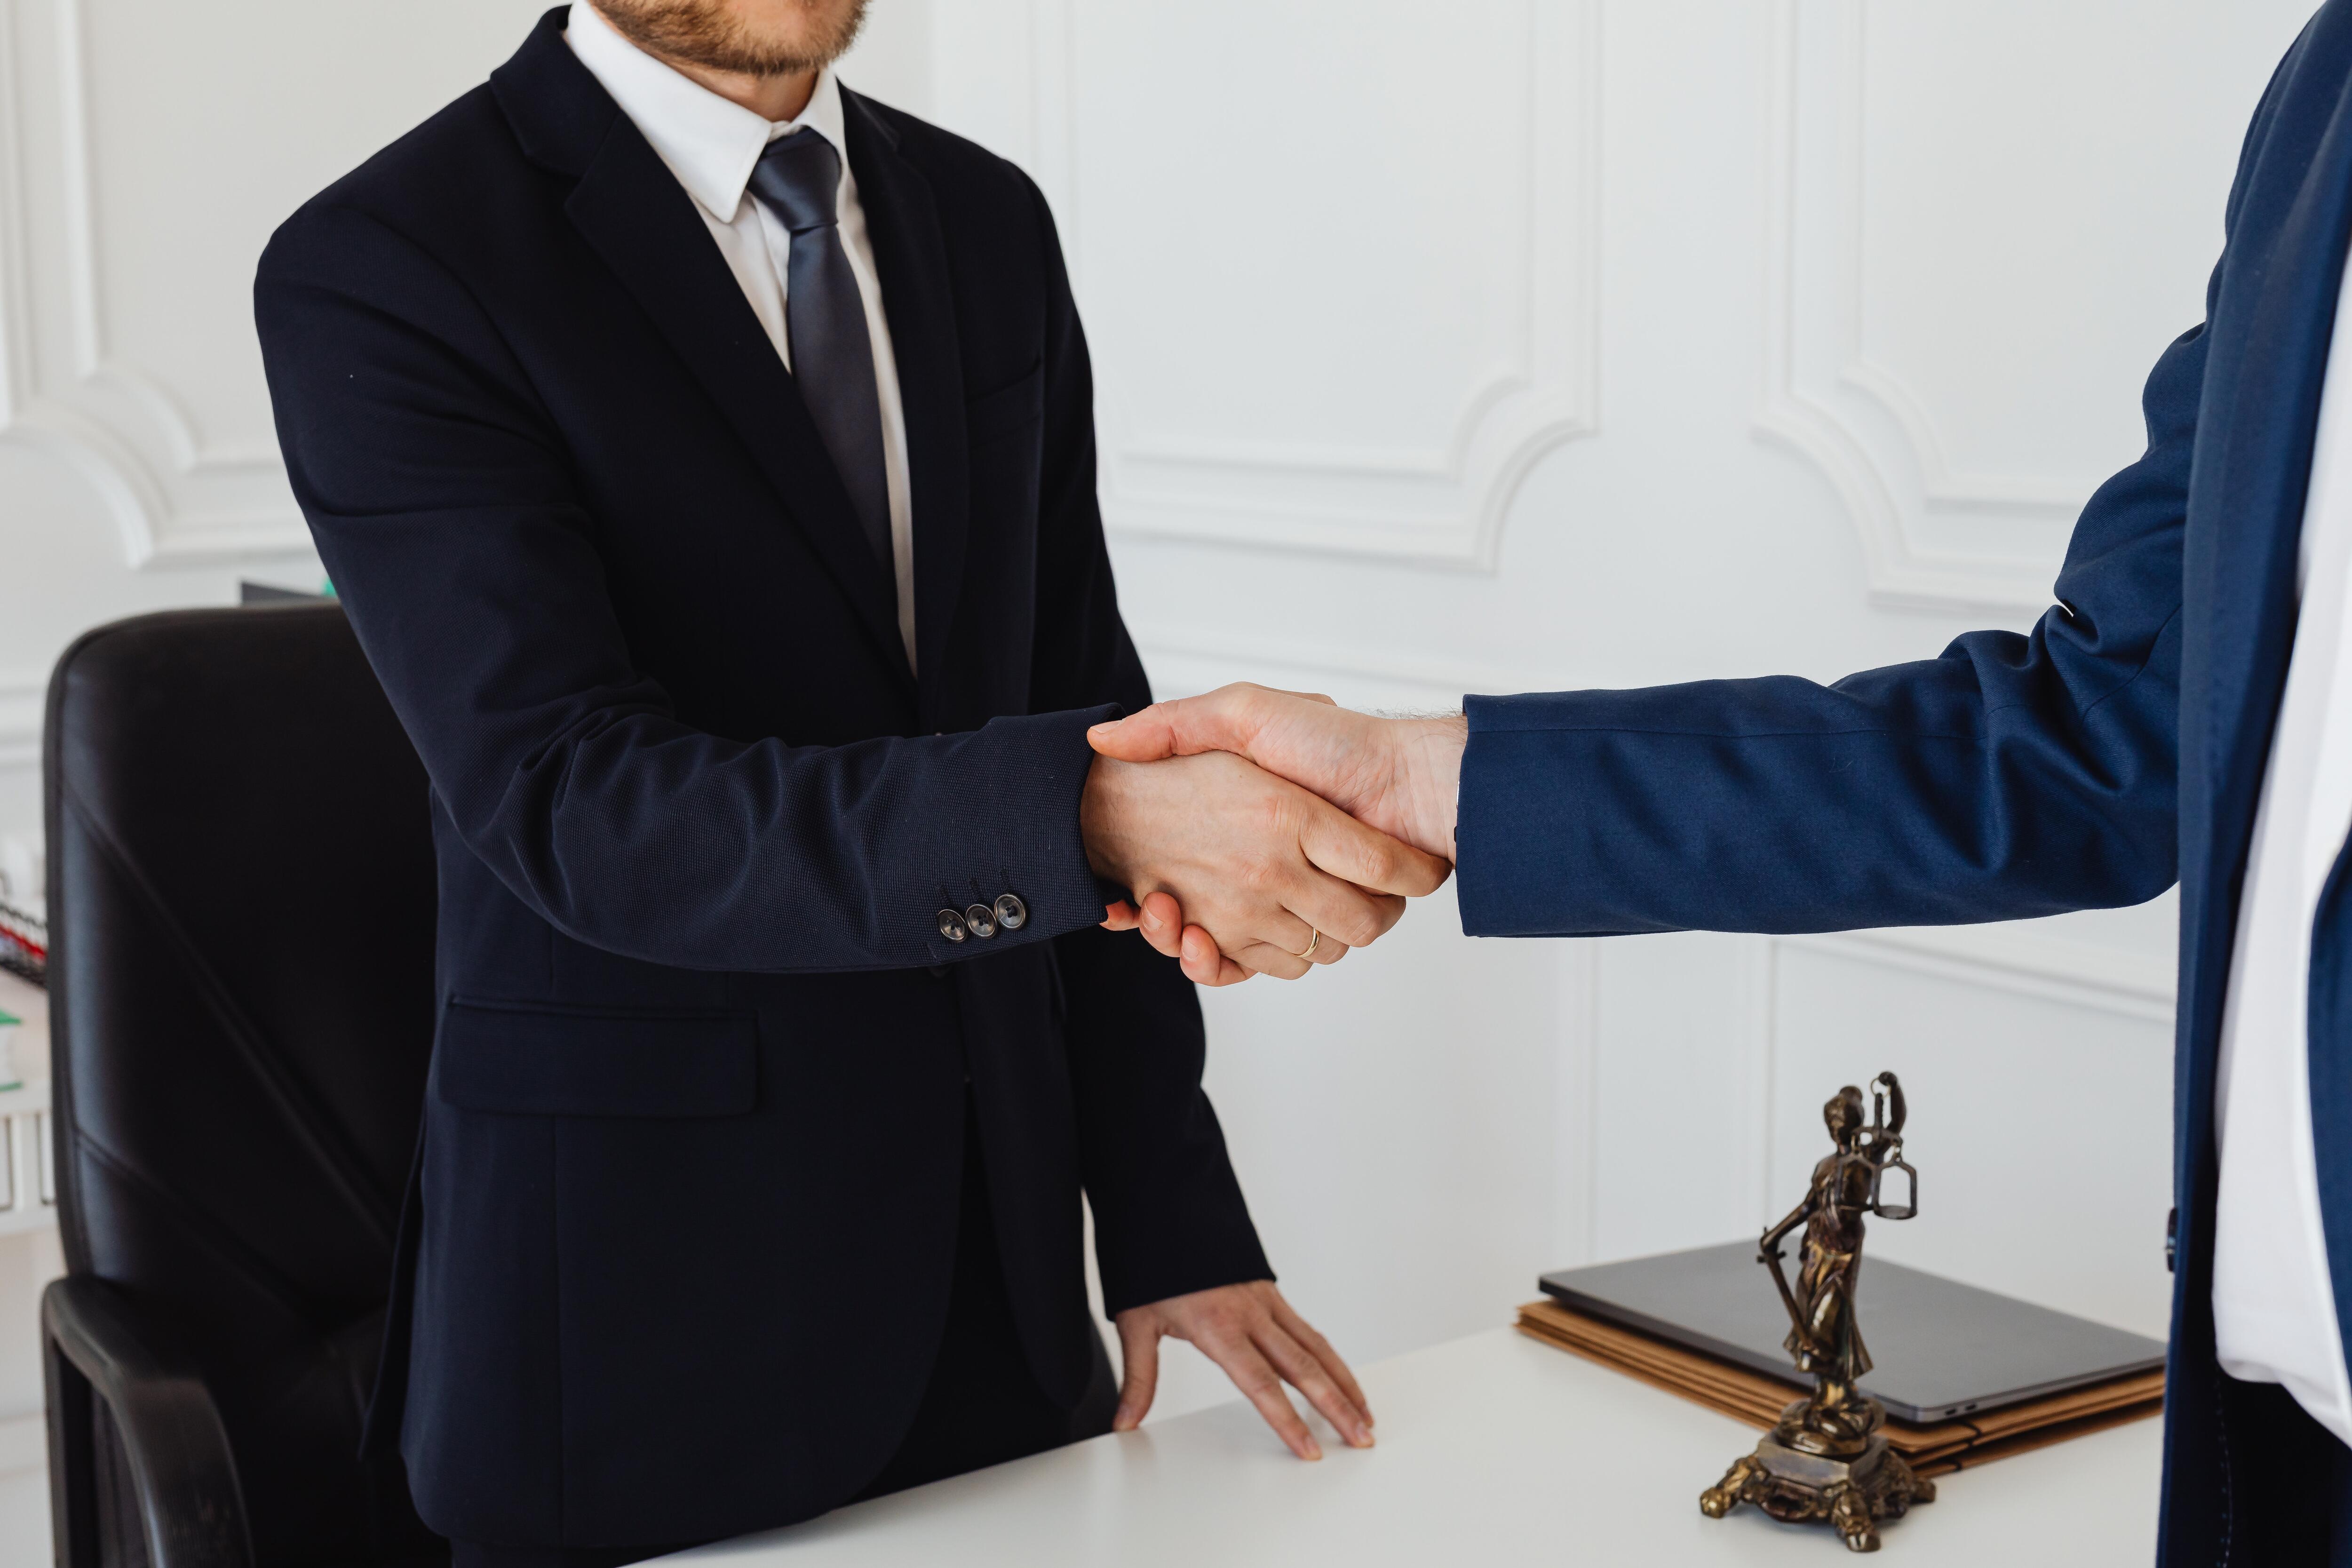 someone in a dark suit and tie shaking hands with someone else in a suit